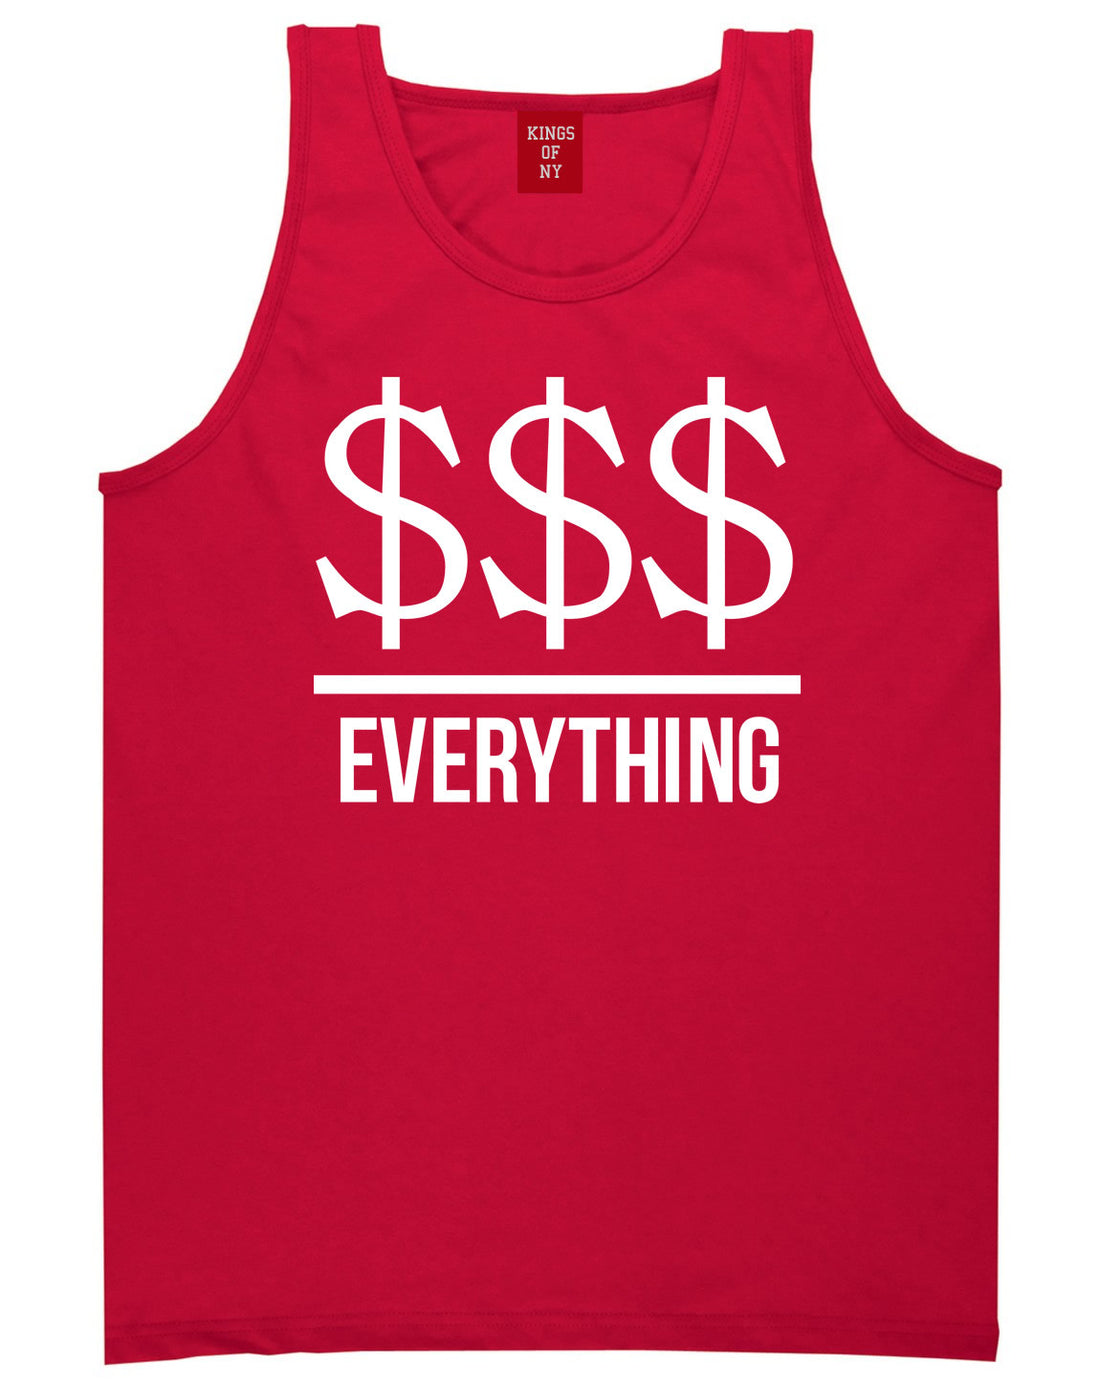 Kings Of NY Money Over Everything Tank Top in Red